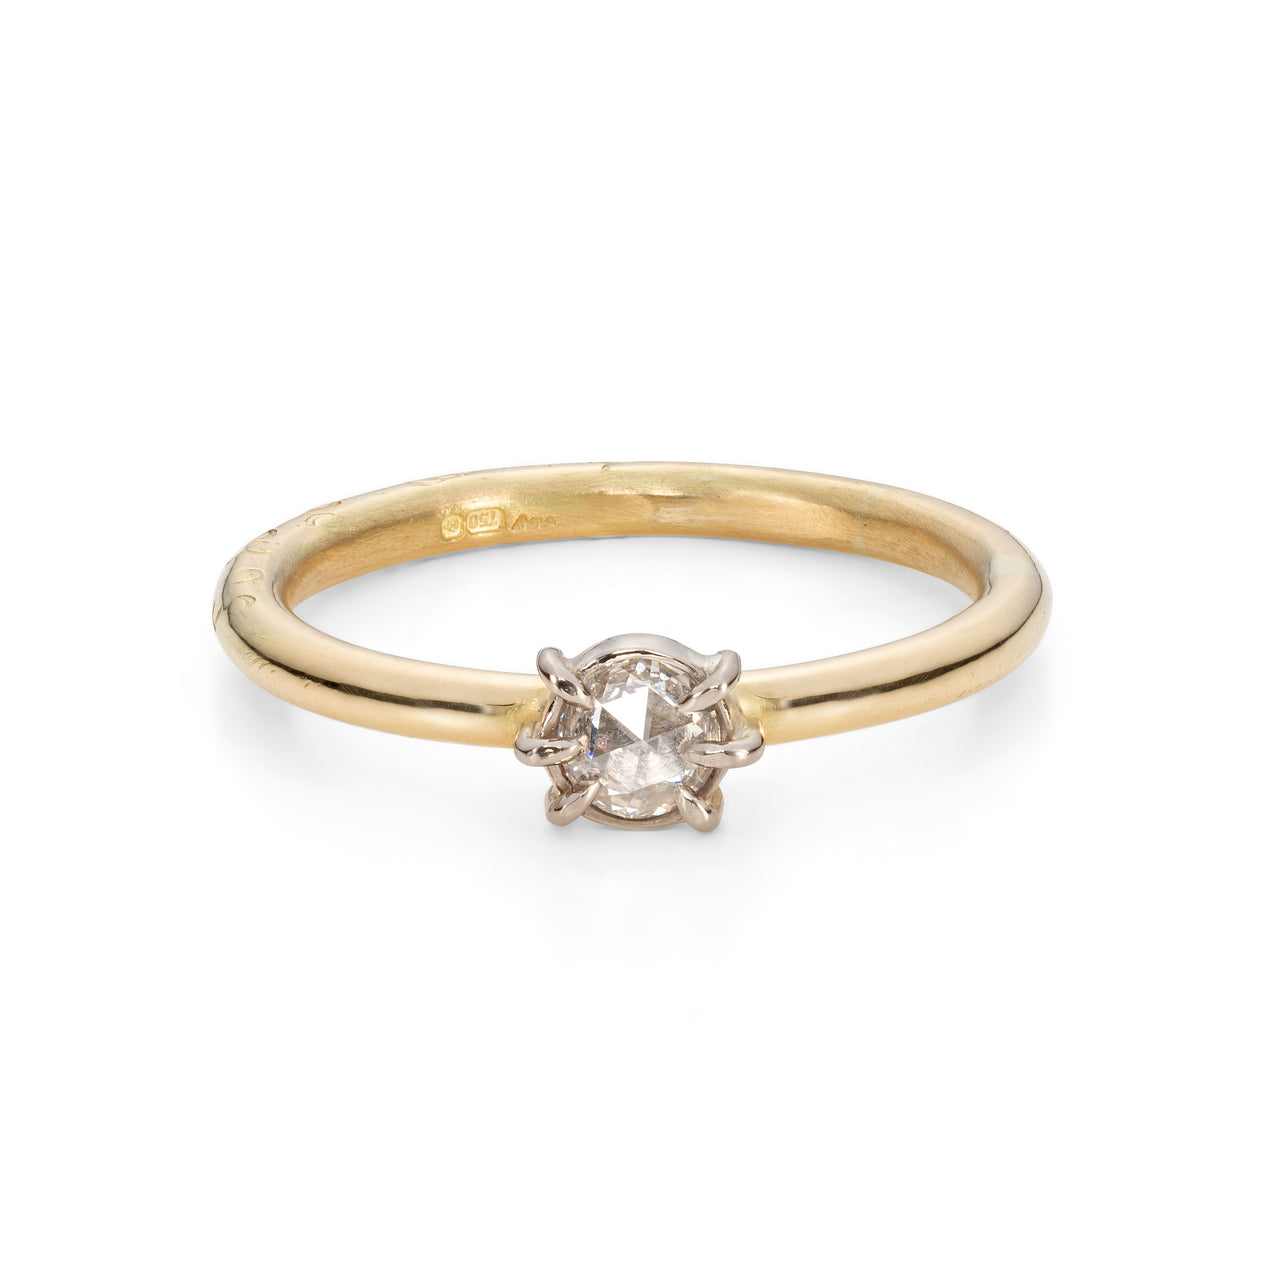 'Dartmoor' Collection Rose cut Misfit diamond claw set contemporary solitaire ring in 18ct yellow and white recycled gold Handmade jewellery by Corrinne Eira Evans